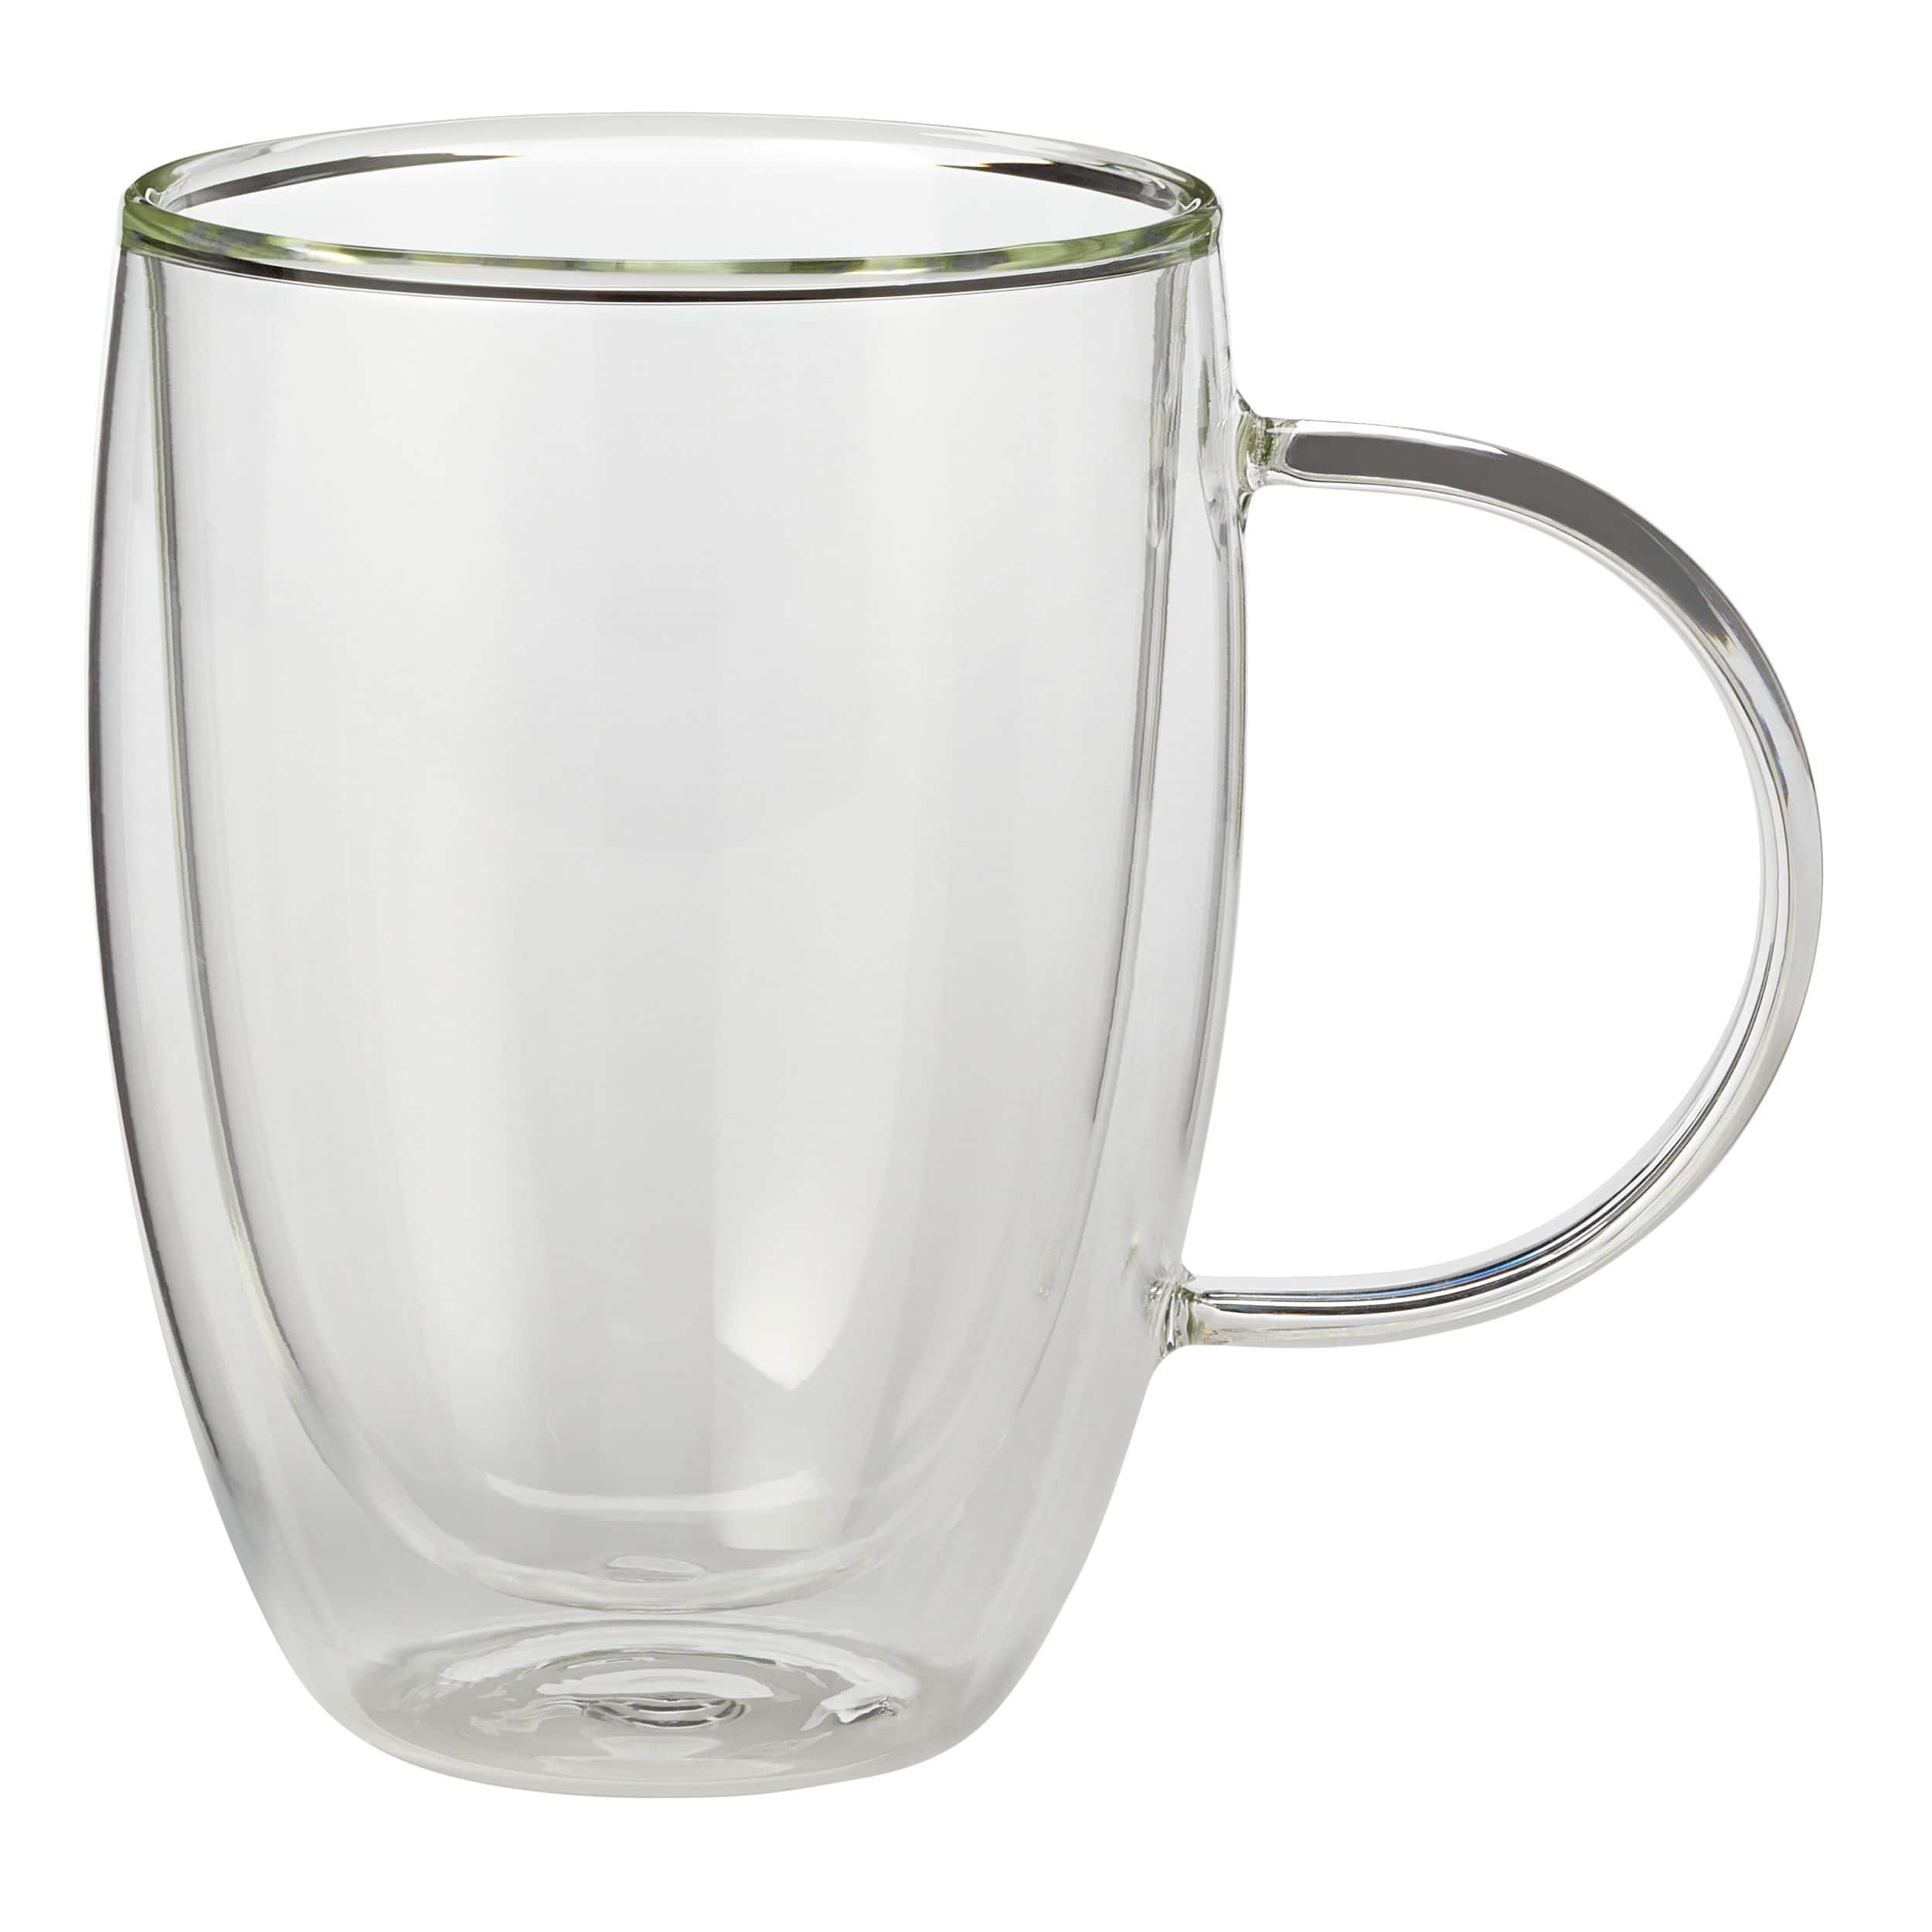 https://media-www.canadiantire.ca/product/living/kitchen/dining-and-entertaining/1429859/canvas-2-pack-double-wall-glass-mugs-388fd18c-39af-44d0-96e1-16e68e4b7803-jpgrendition.jpg